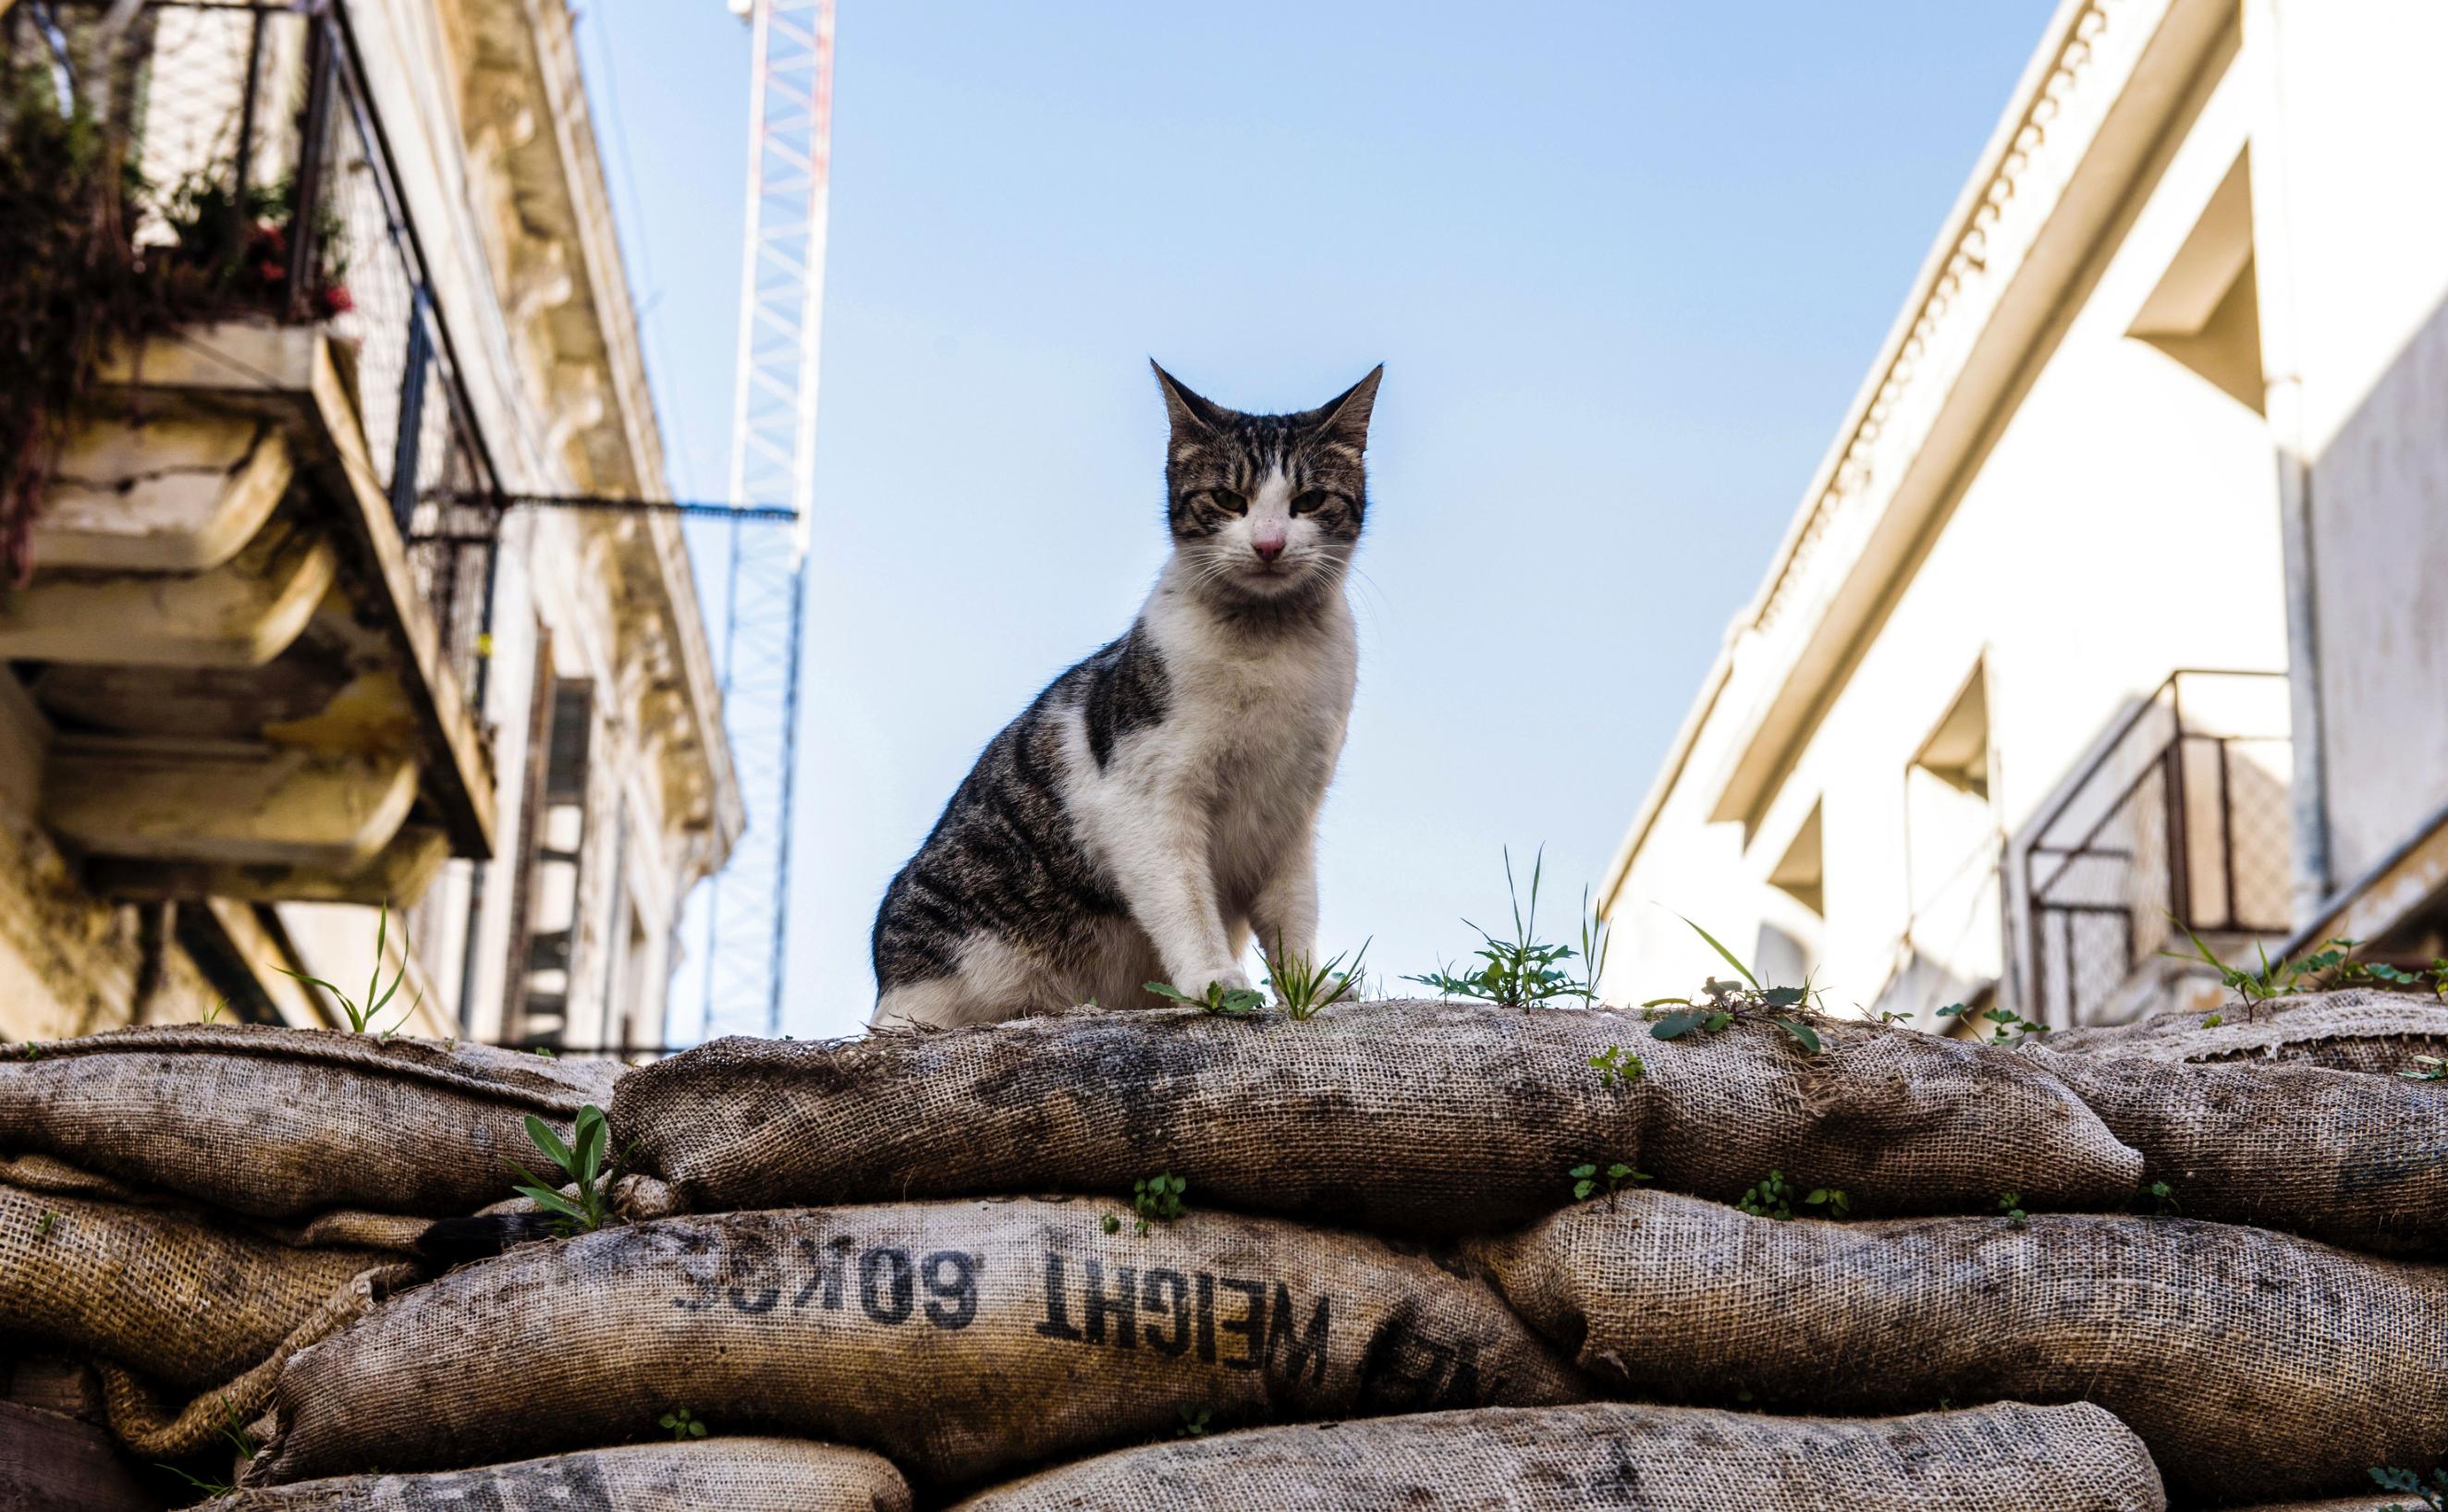 The case cats: Why has declared war on feral felines | CNN